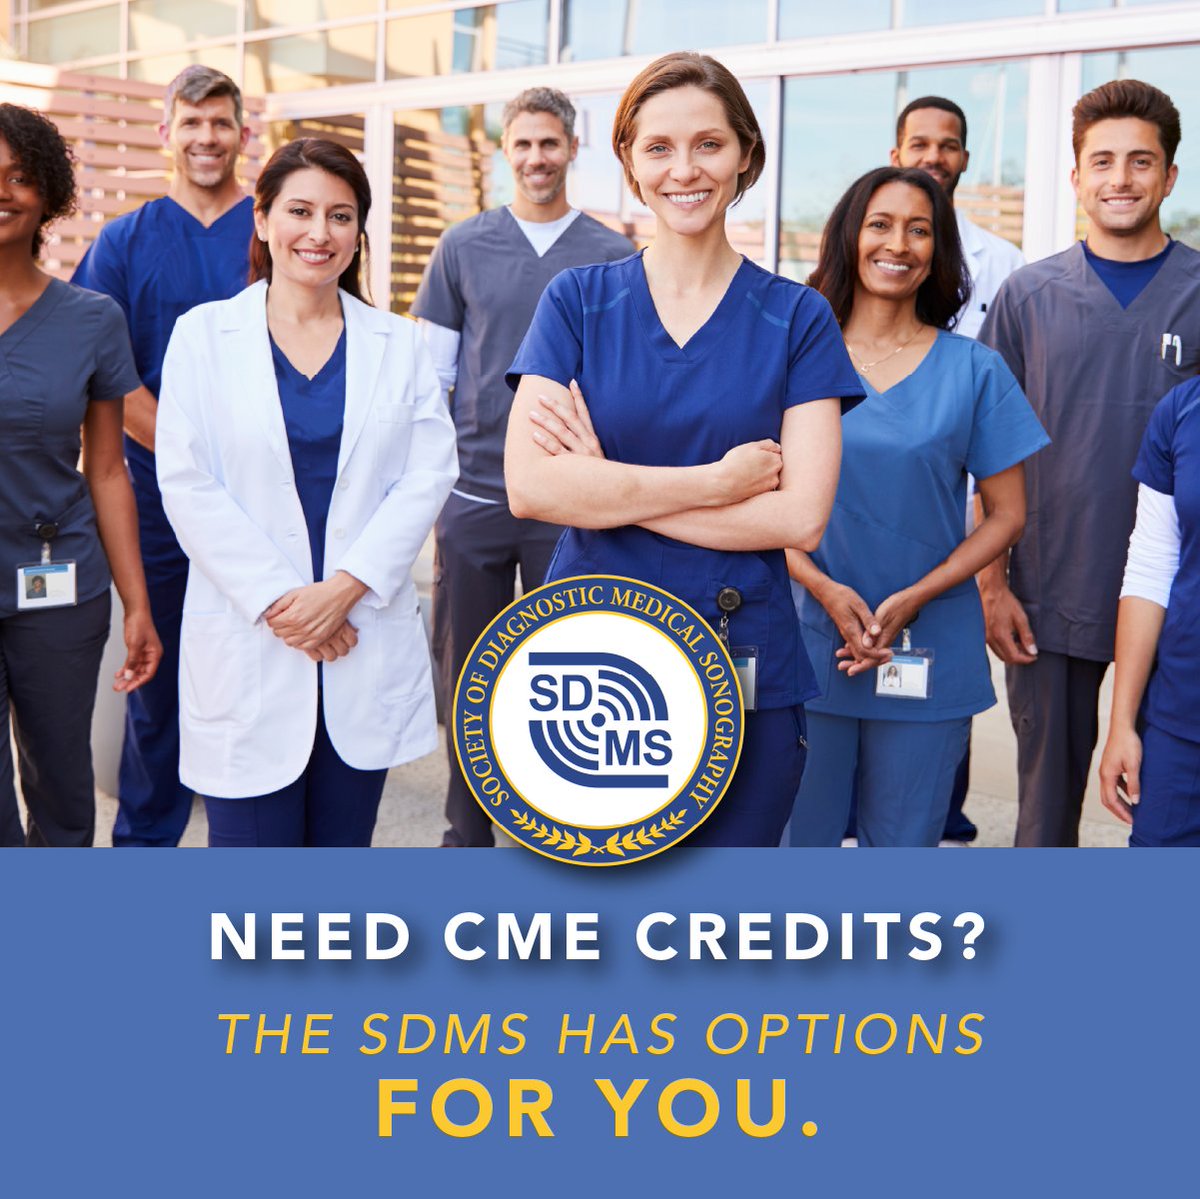 Calling all #SDMS members! Delve into the world of endless learning with our FREE on-demand SDMS #CME credit opportunities across all specialties. Your journey towards expertise is just one click away: bit.ly/3Jz4zxy #Ultrasound #Sonography #CMECredits #MemberBenefits